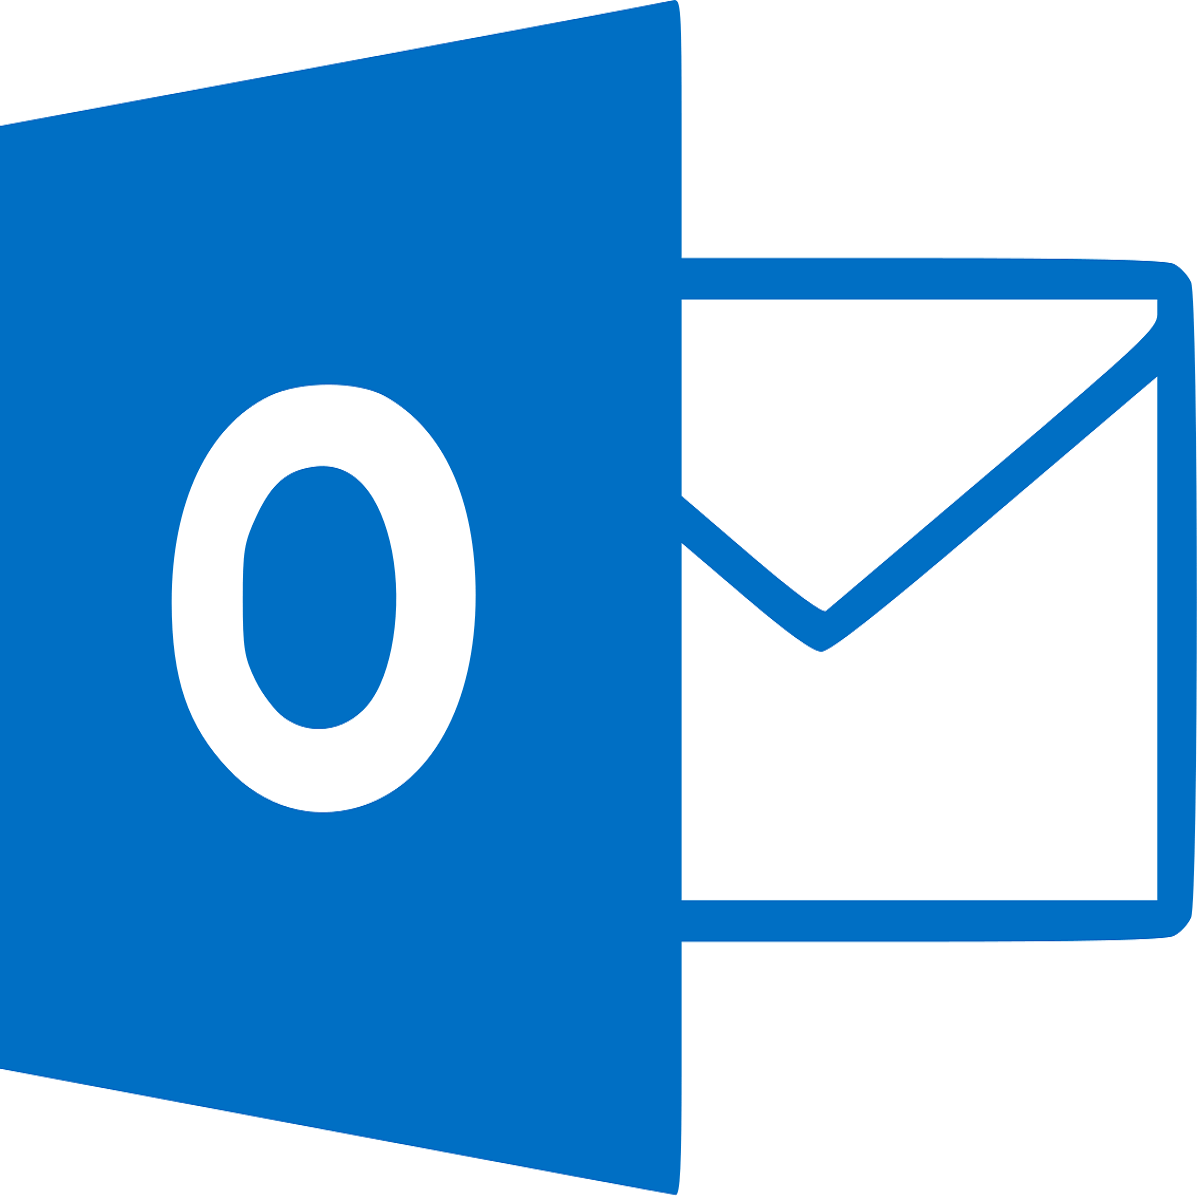 Shared folder limit in Outlook for Windows increased